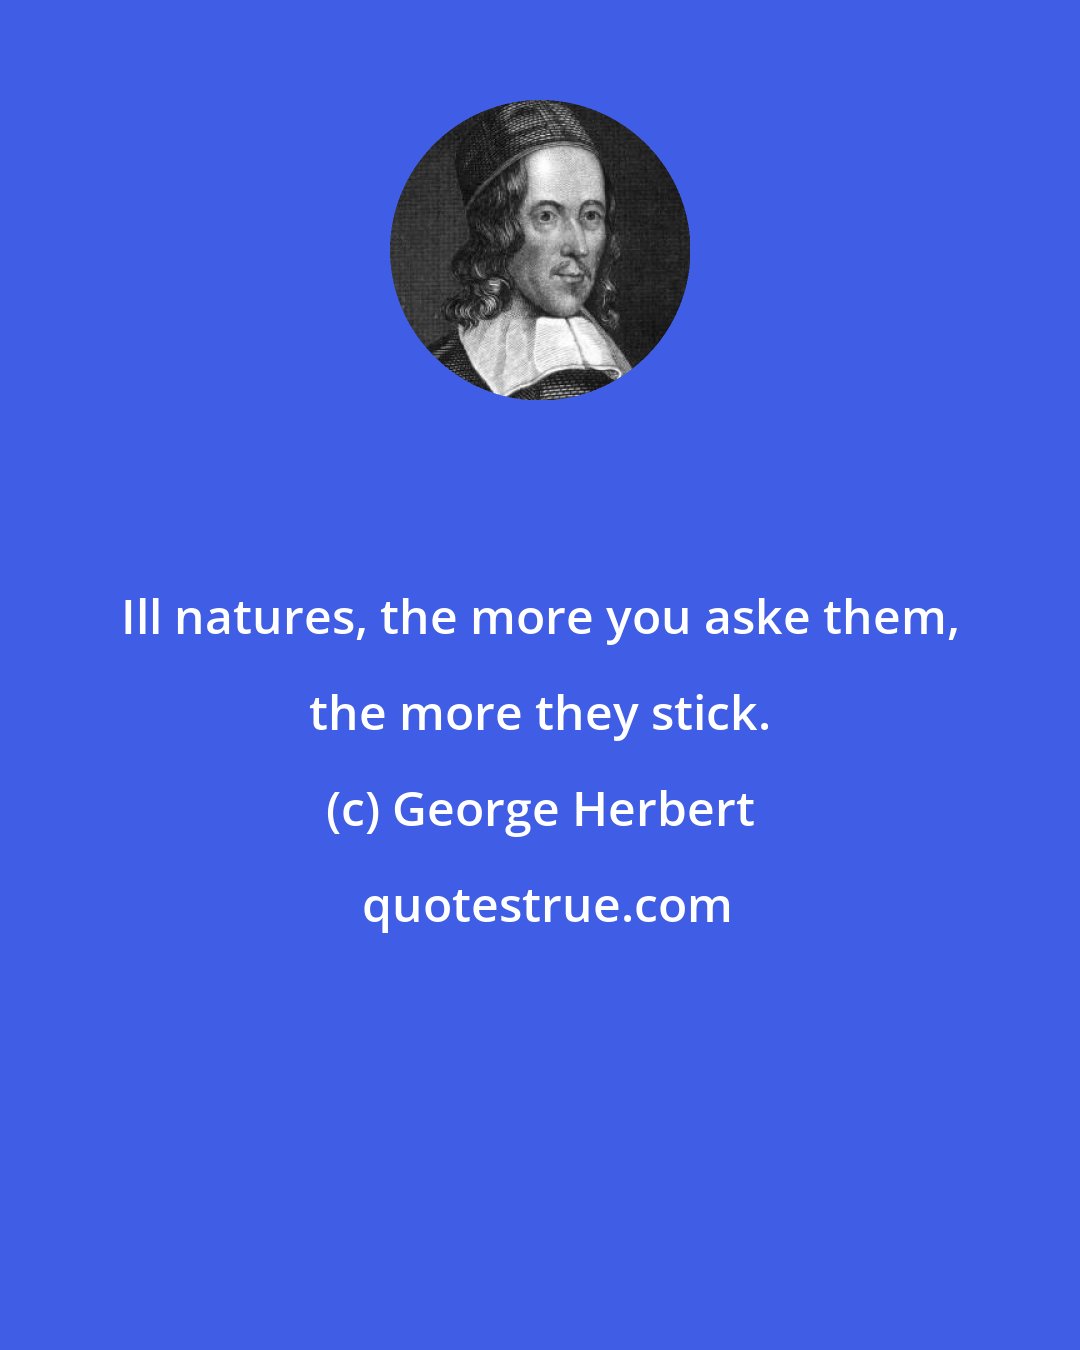 George Herbert: Ill natures, the more you aske them, the more they stick.